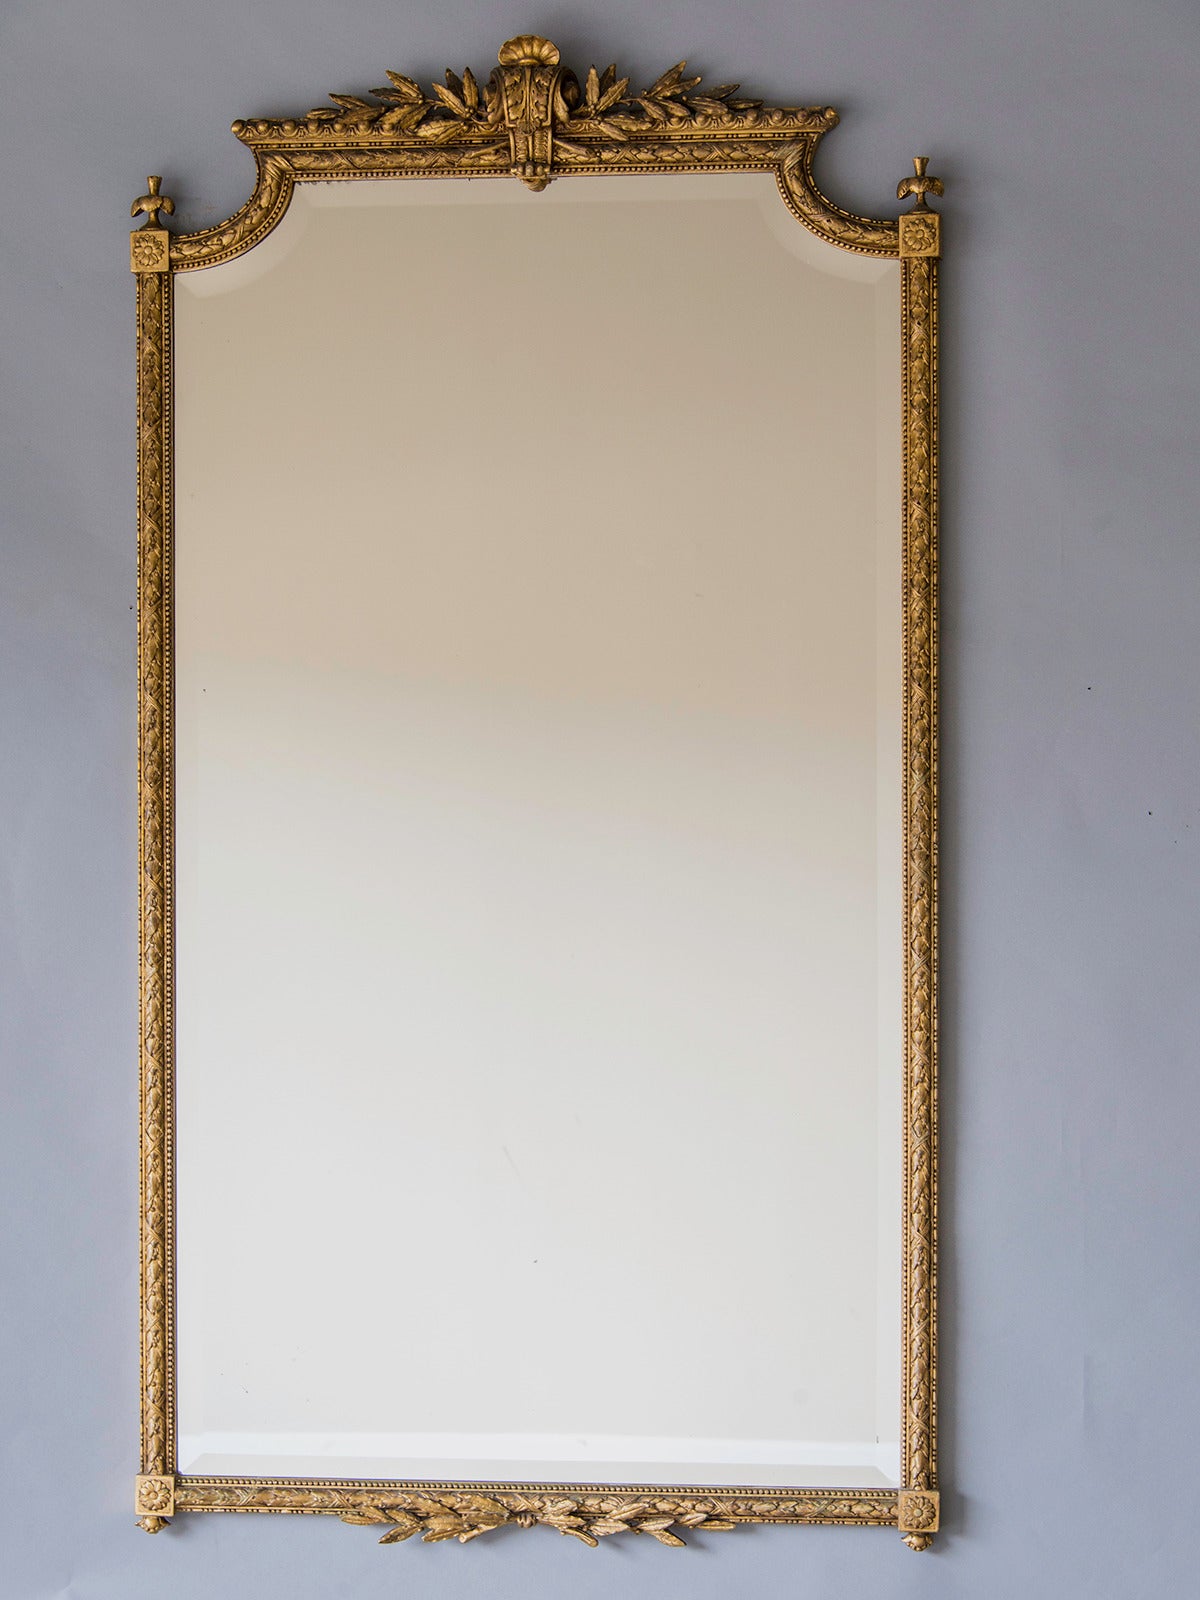 Louis XVI Style Gold Leaf Mirror, Belle Époque France c.1895. This grand and imposing mirror is notable for the slender and elegant proportion of its frame. The cartouche at the centre of the top has its origins in the designs of the Régence